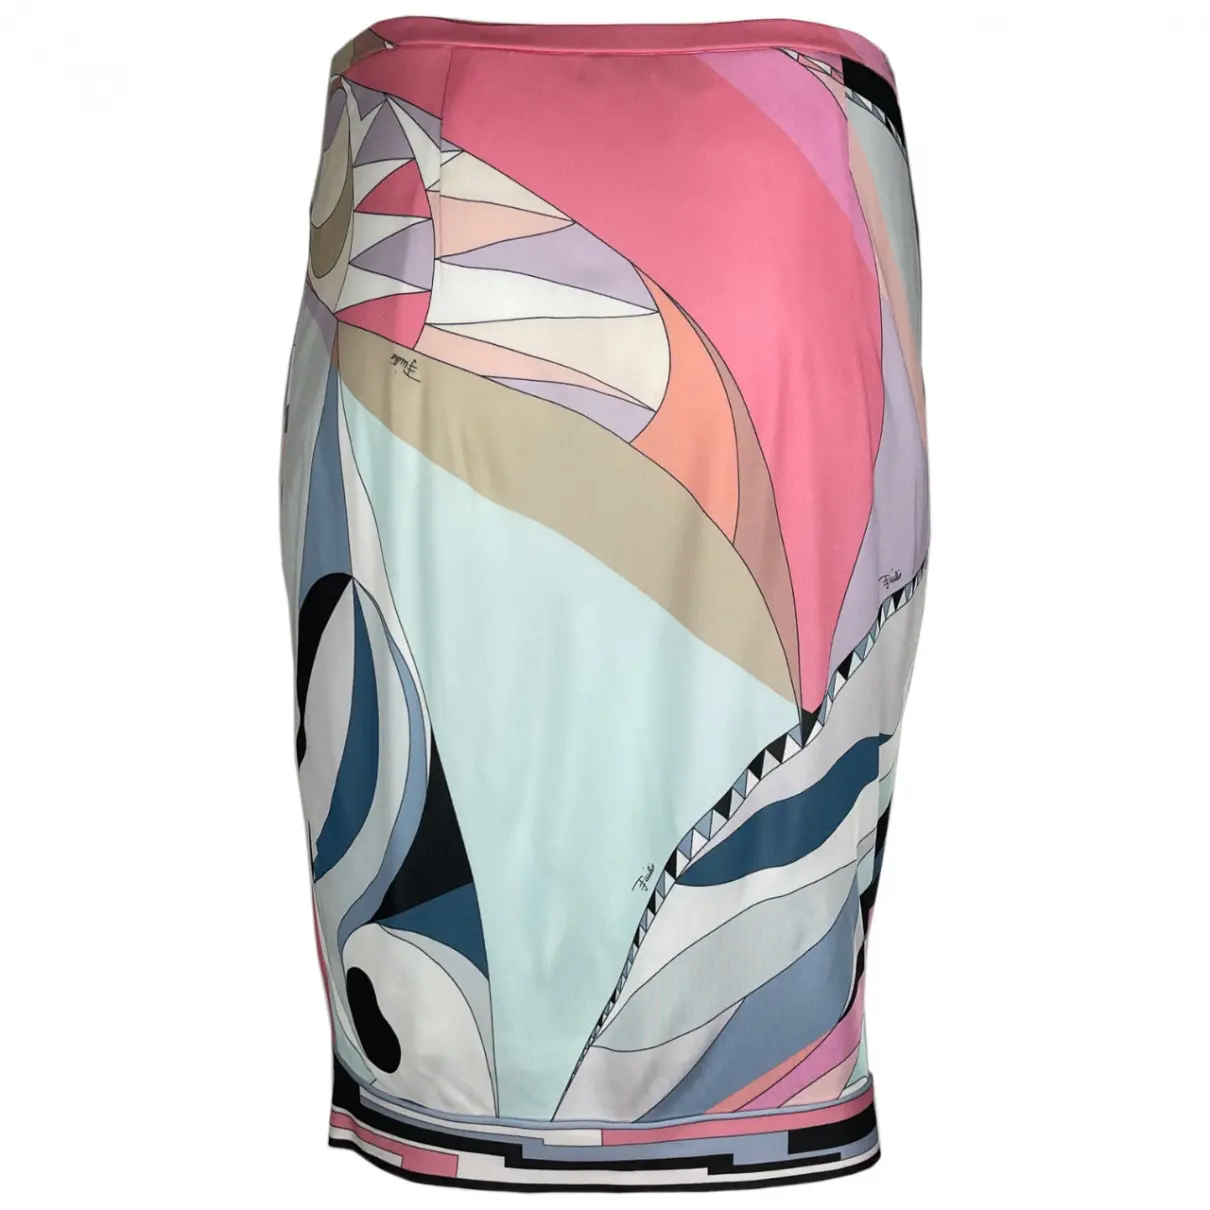 Buy Emilio Pucci Mid-length skirt online